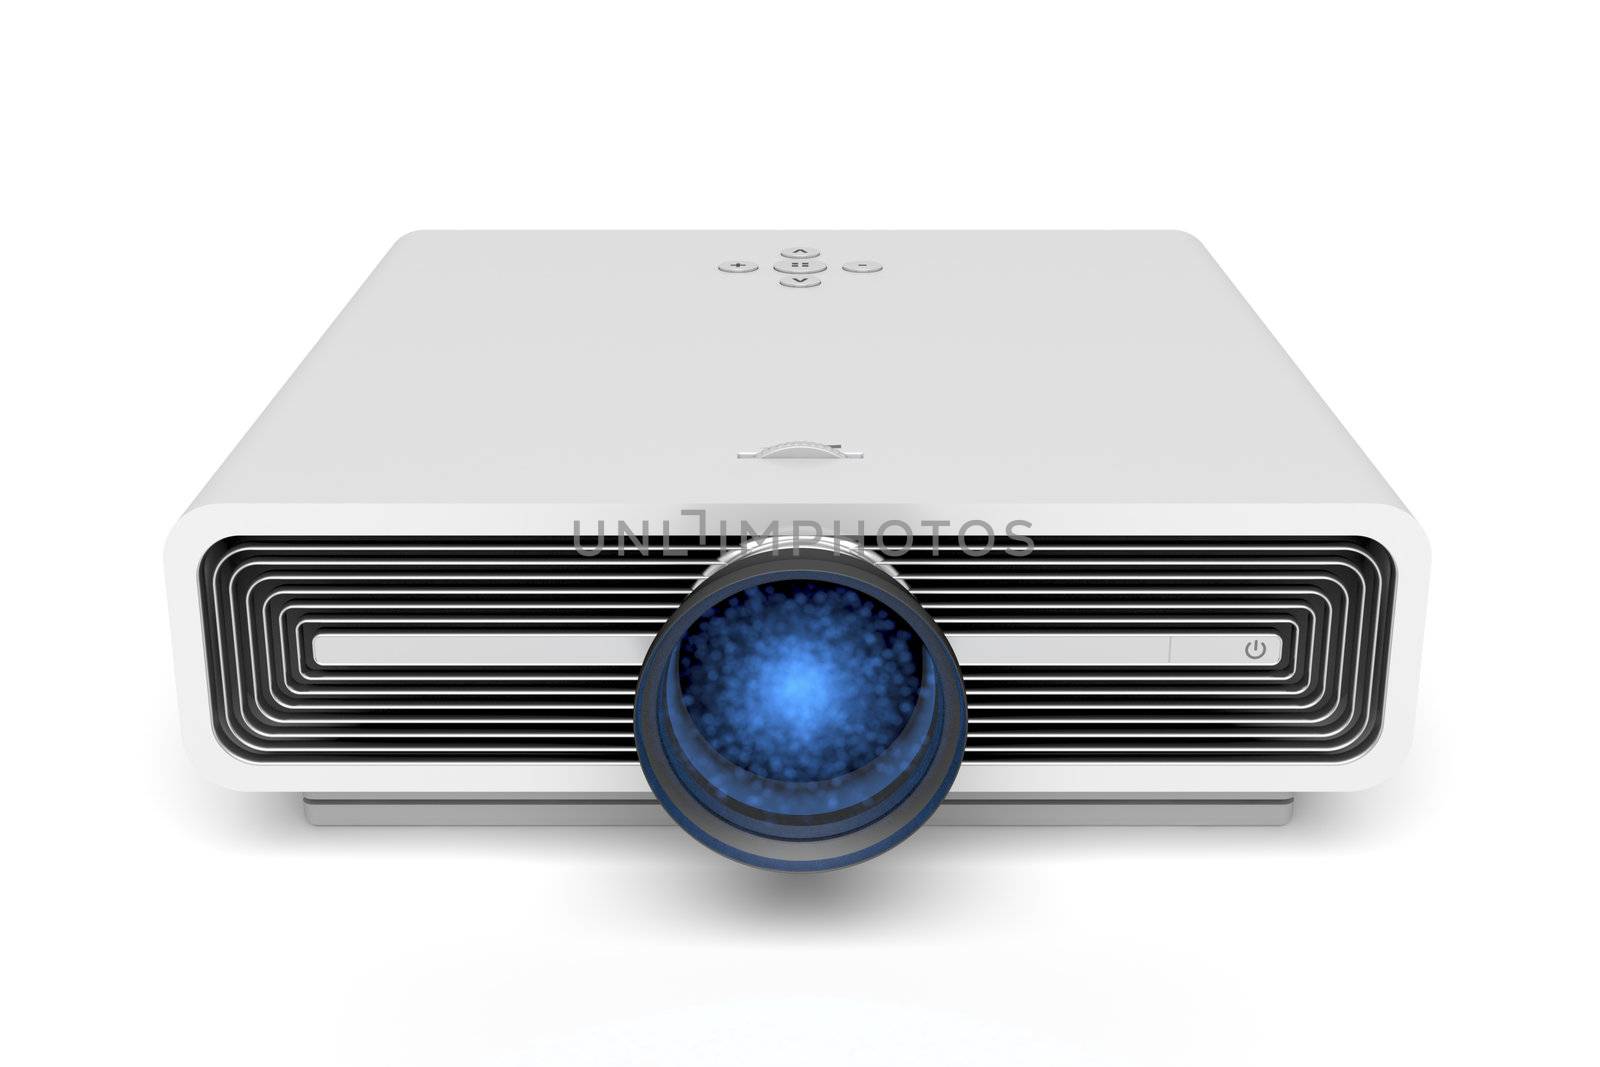 Multimedia projector by magraphics